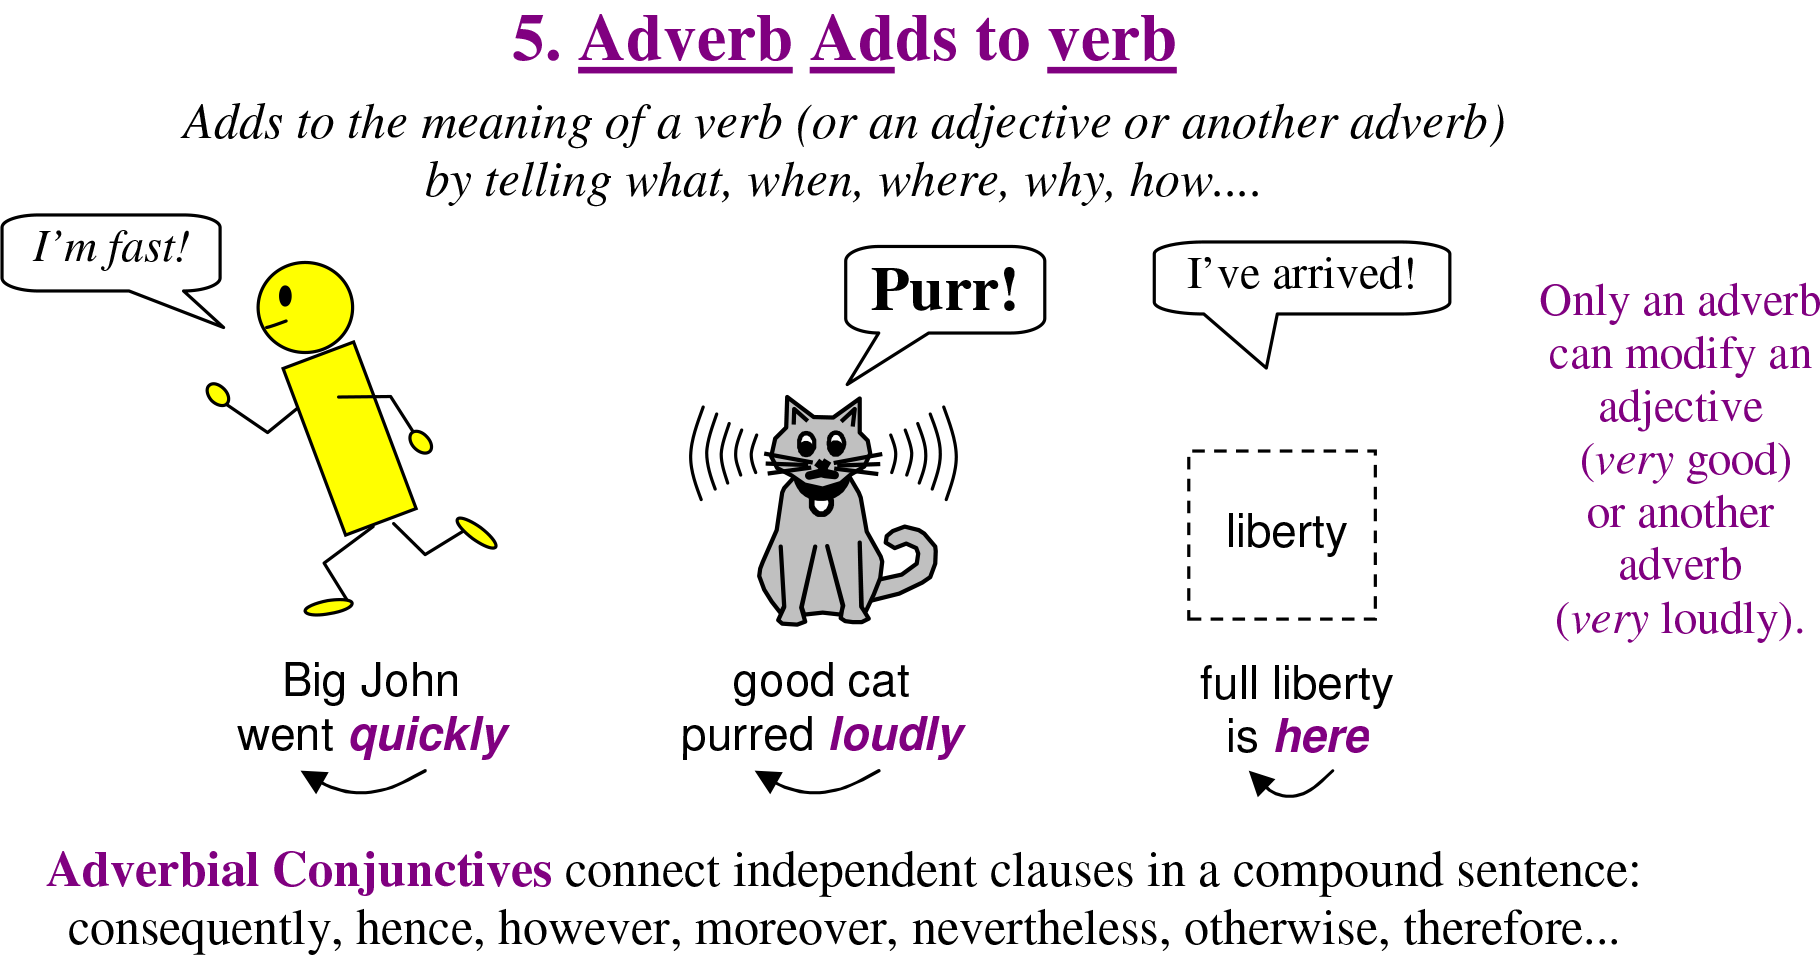 Please adverb. Adverb. Adjectives and adverbs. Adverb is. Adverbs of manner.